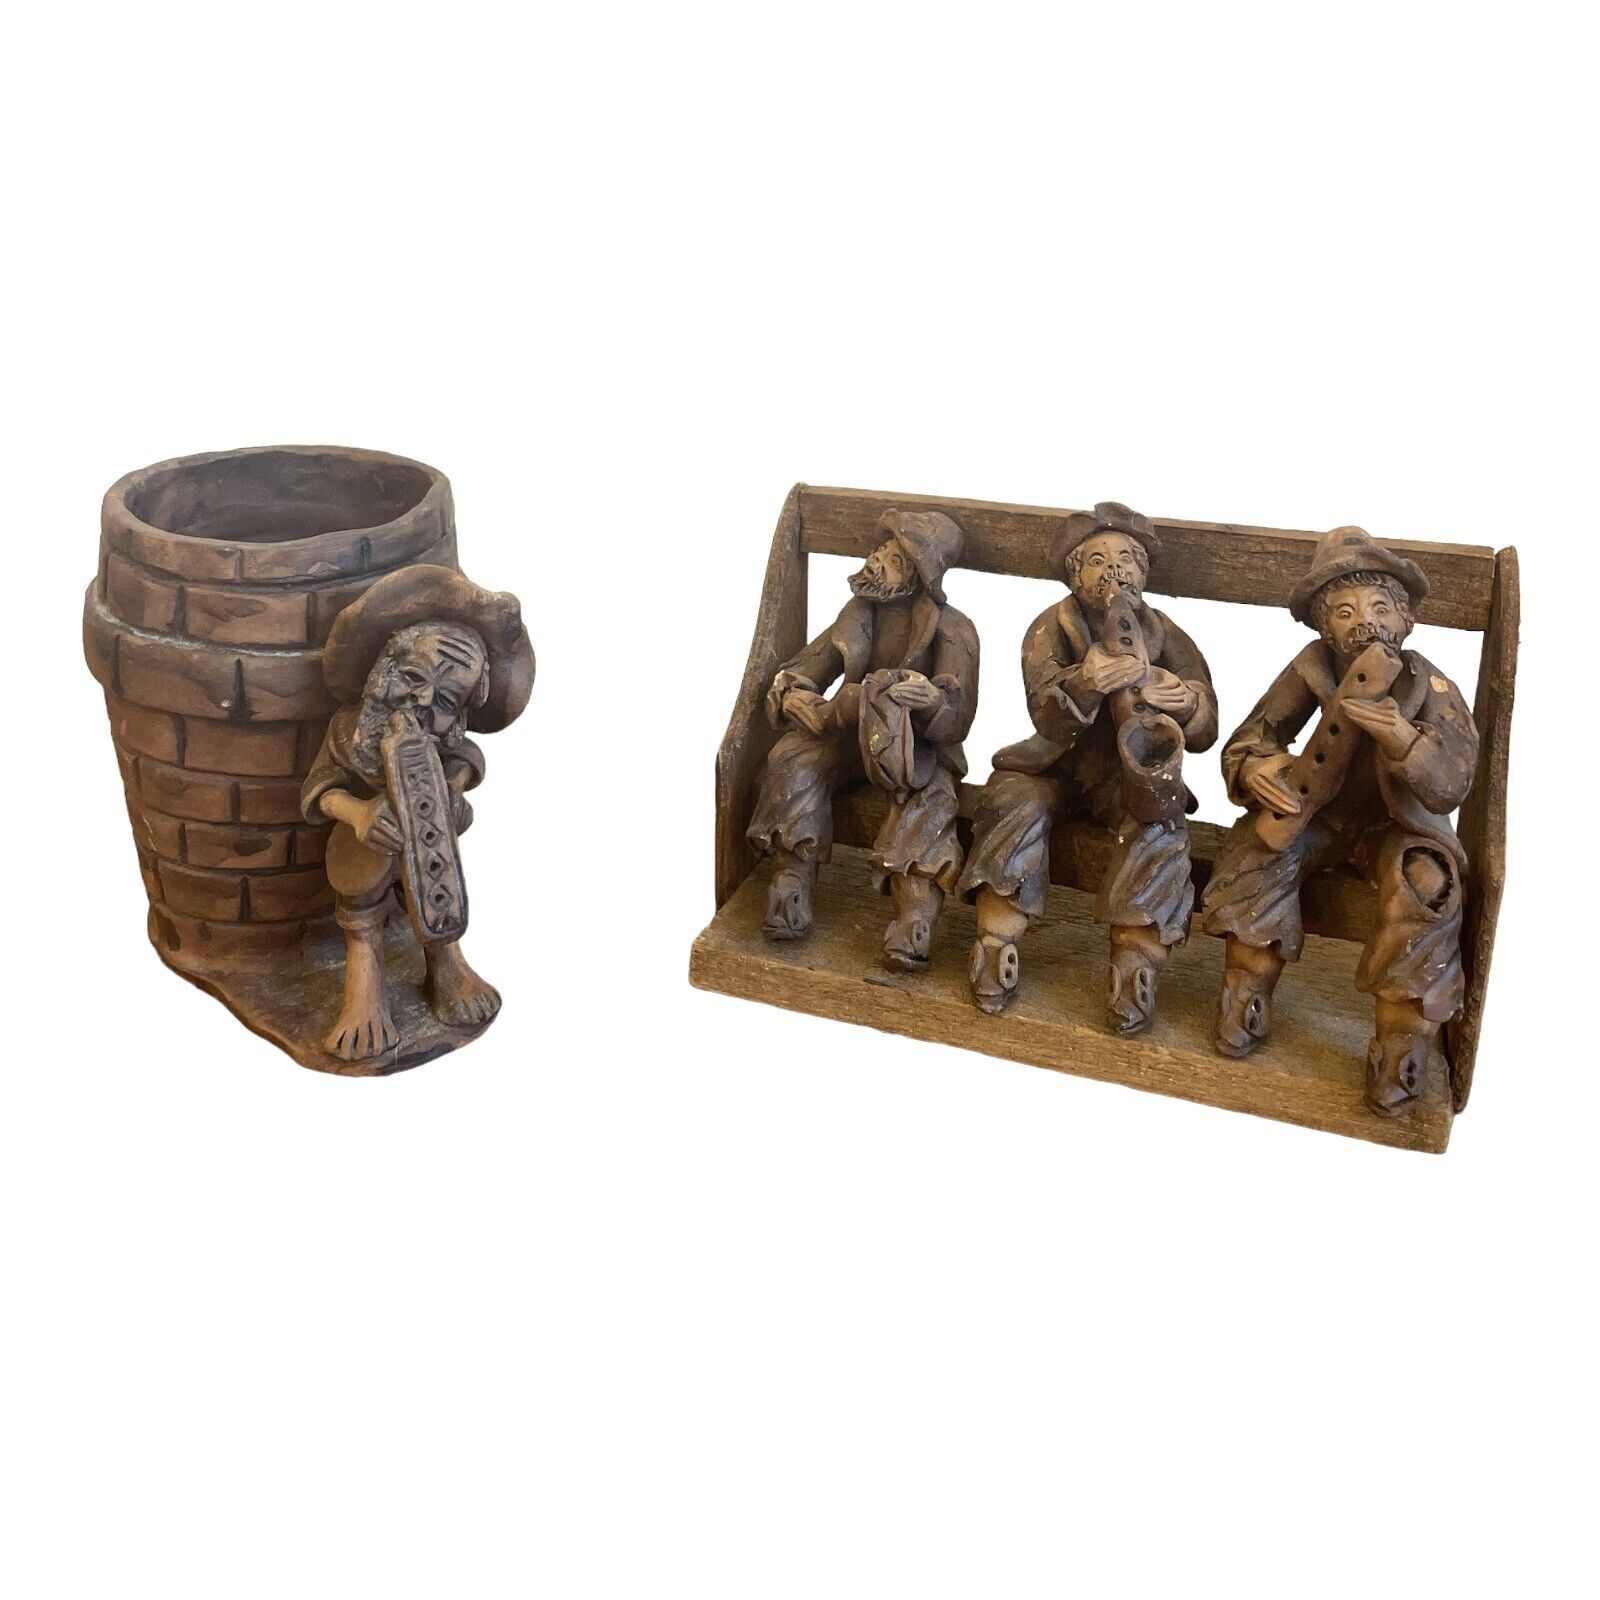 THREE MUSICIANS FIGURINES ON WOODEN BENCH AND CERAMIC POT WITH MUSICIAN PLANTER